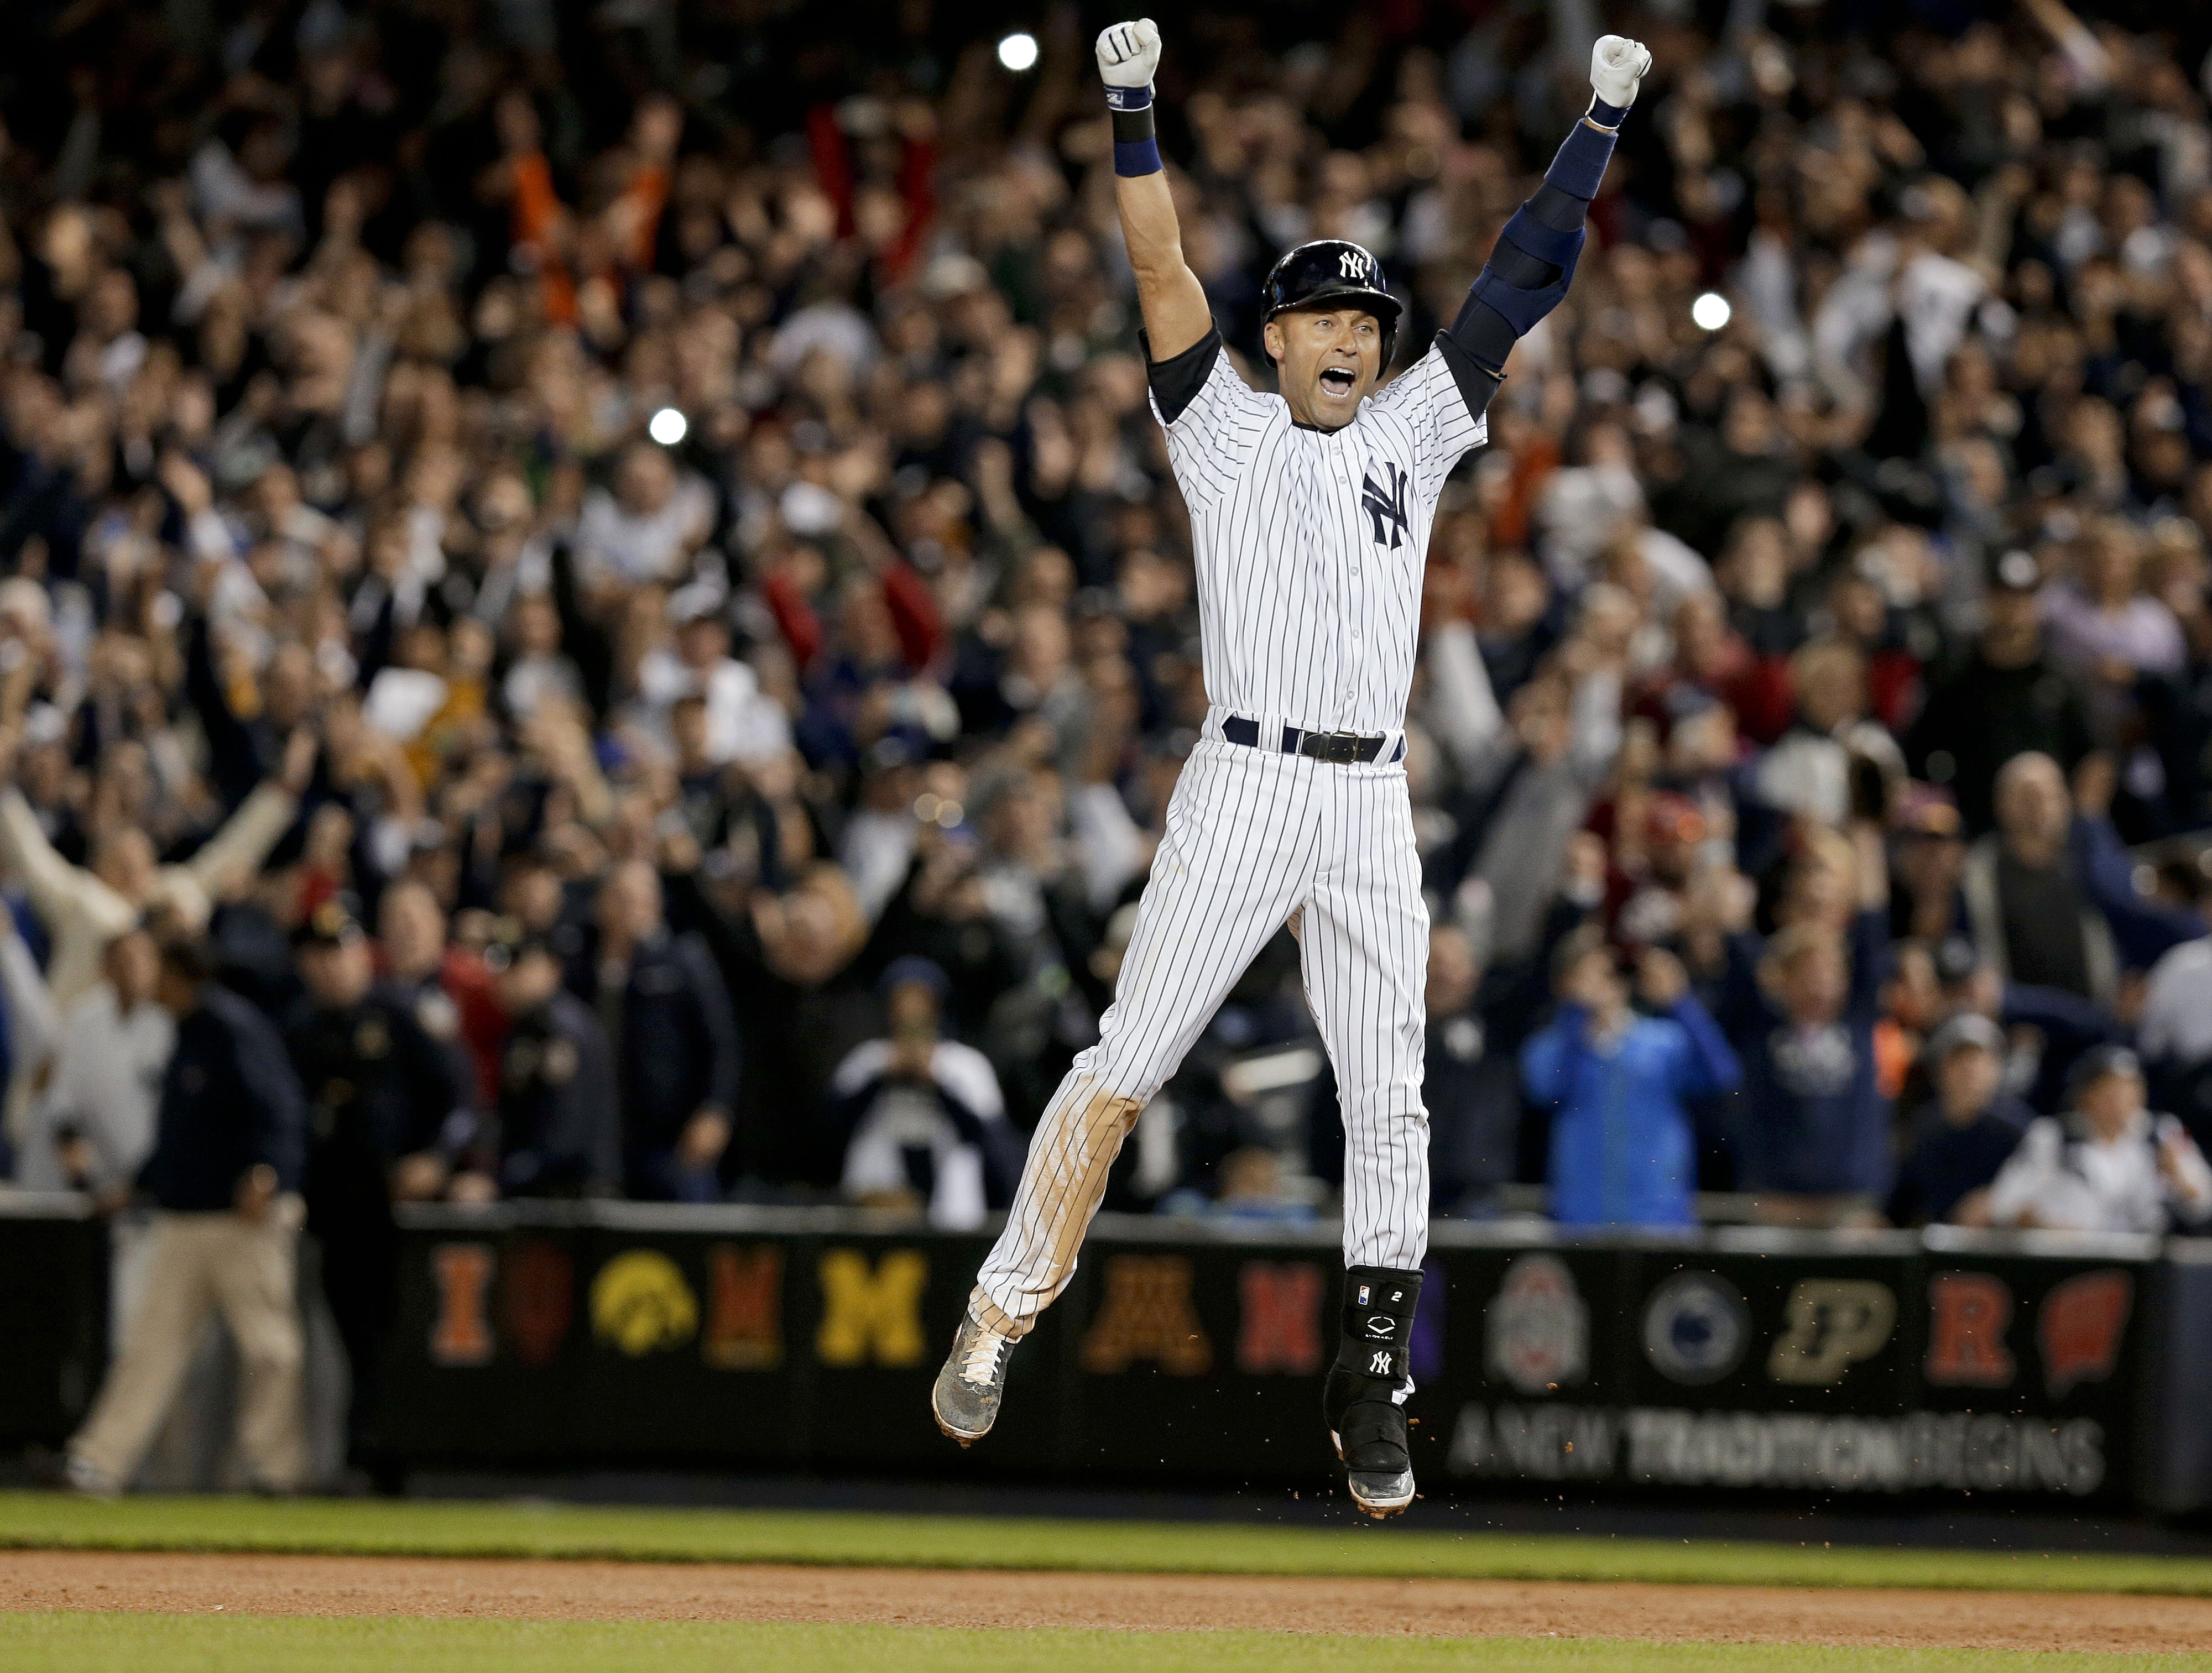 New York Yankee Derek Jeter jumps after hitting the game-winning single against the Baltimore Orioles in the ninth inning of a baseball game on Sept. 25, 2014, in New York.